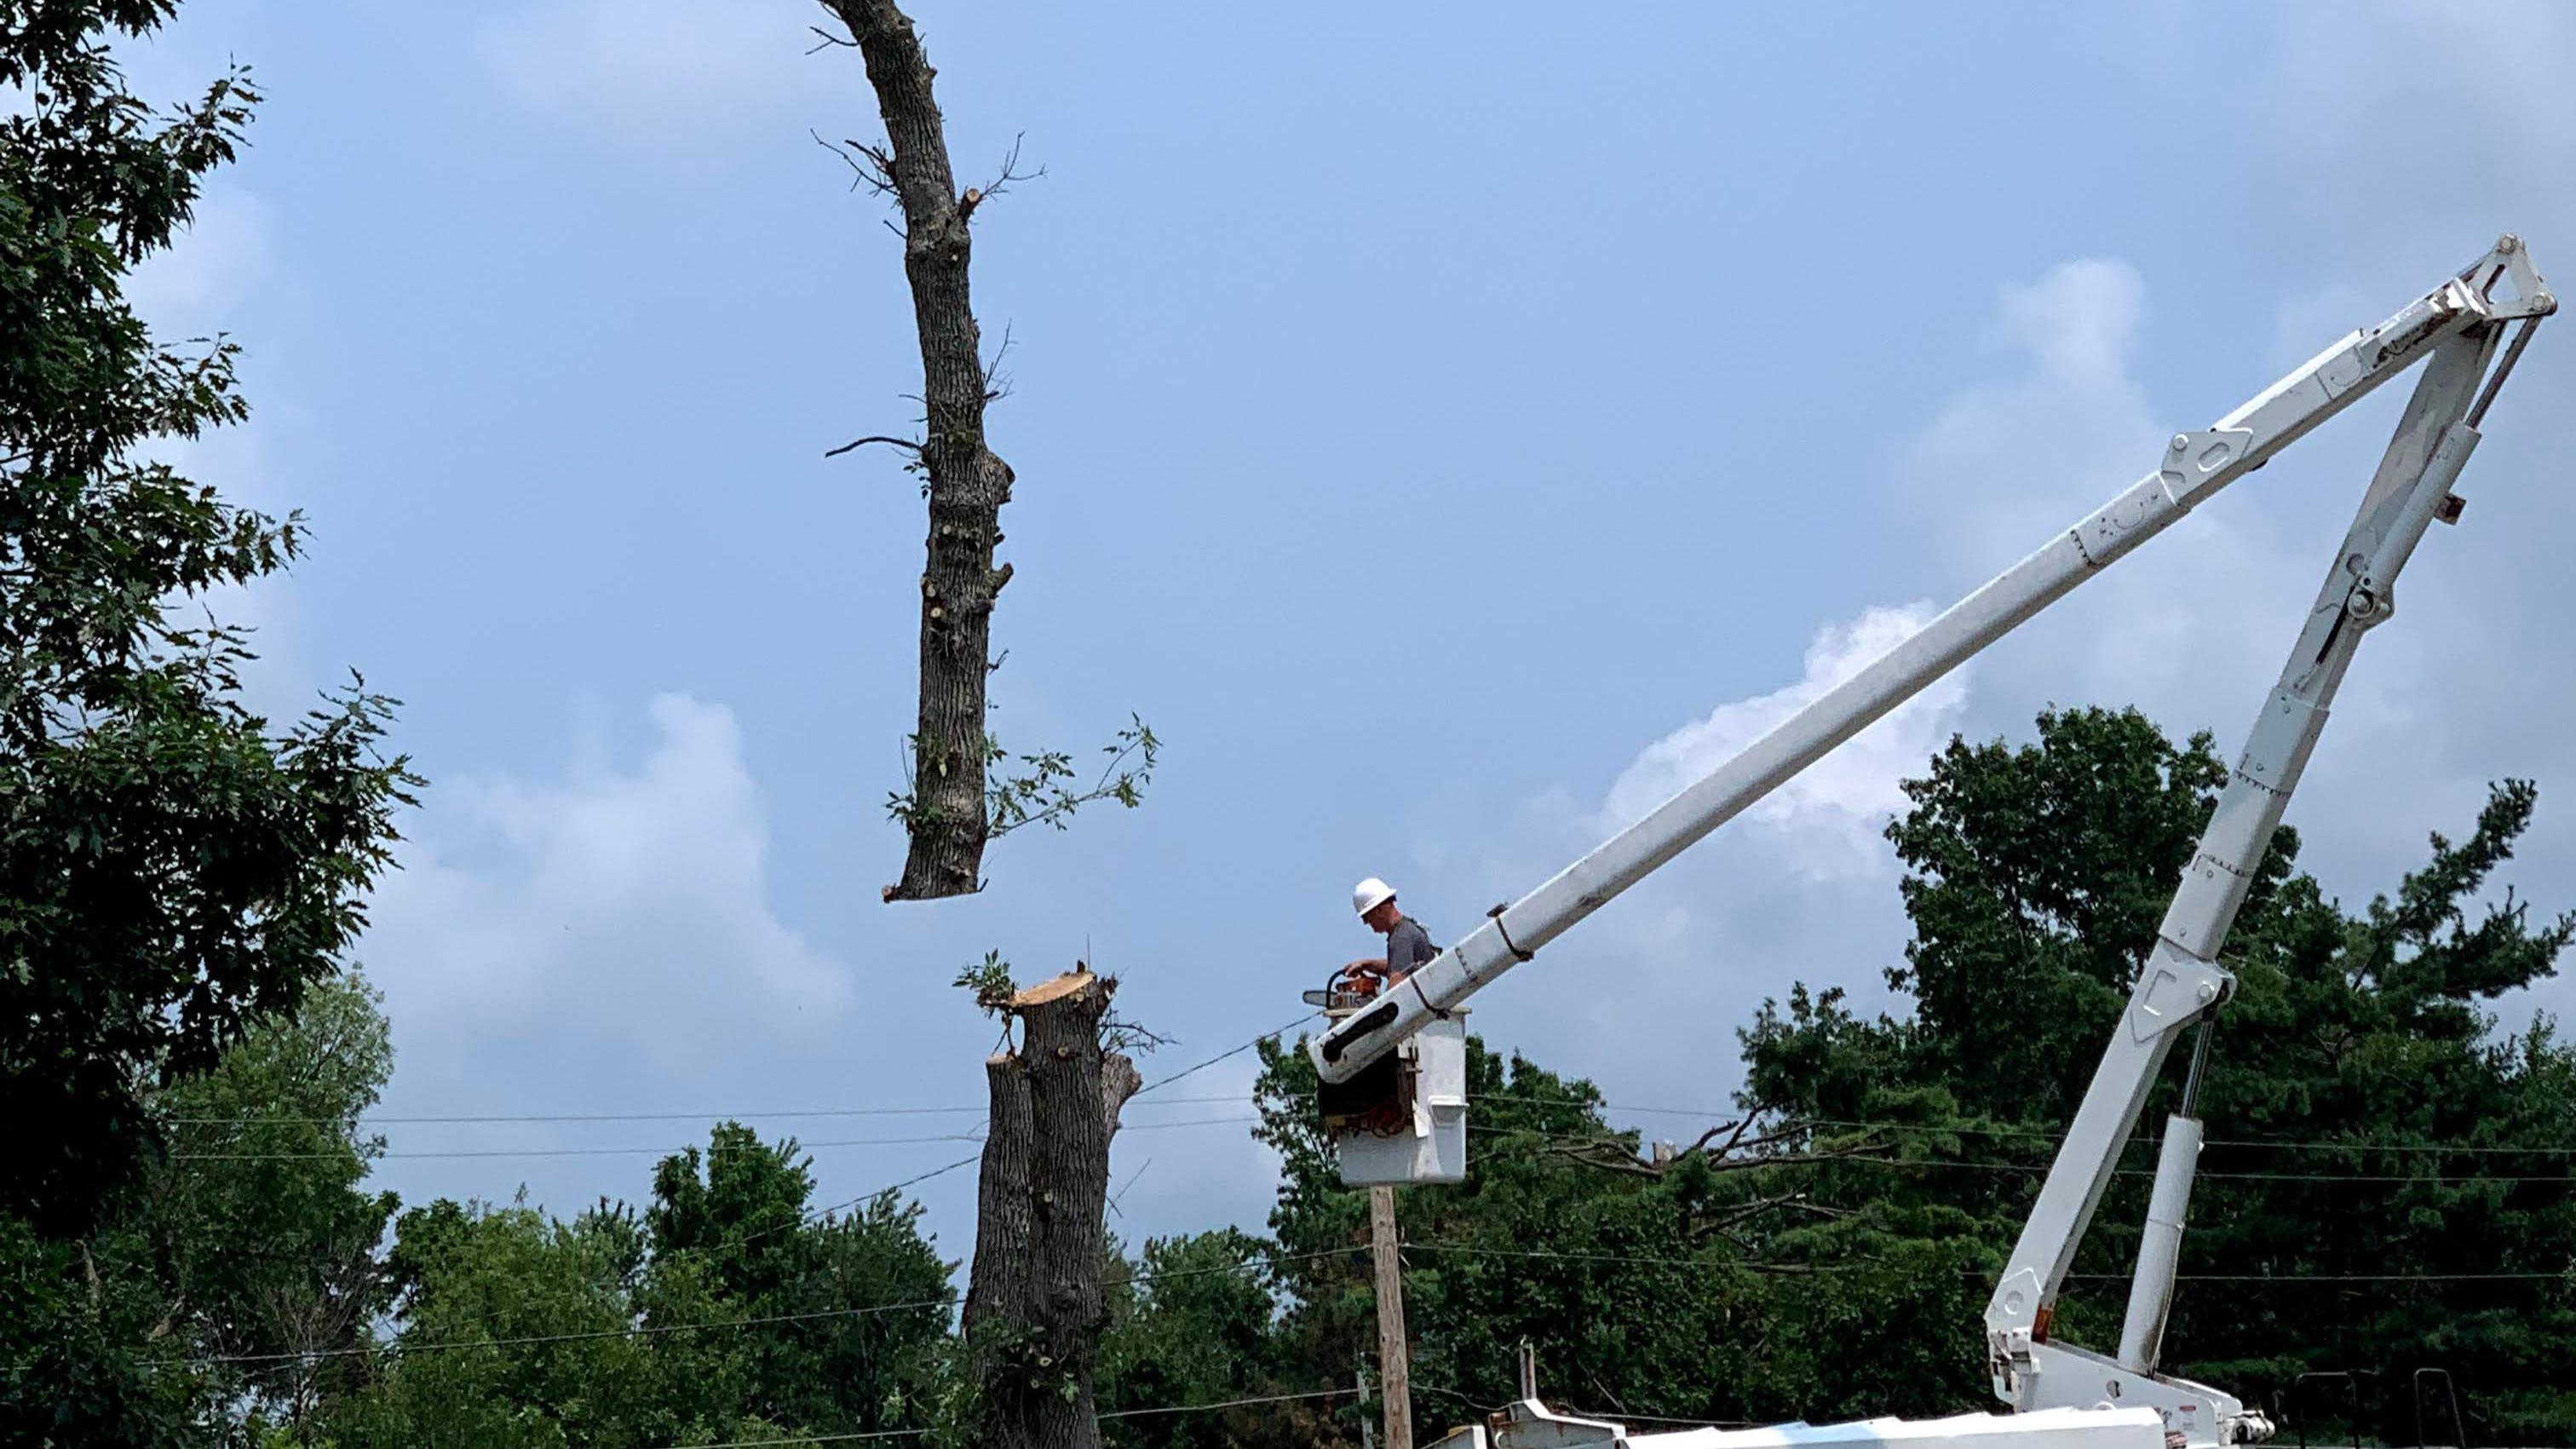 When tree removal becomes necessary, rely on the experienced team at Dittmer Tree Service to handle the job safely and efficiently. Our skilled technicians use state-of-the-art equipment and proven techniques to safely remove trees of any size or complexity. Whether due to disease, storm damage, or space constraints, you can count on us to remove unwanted trees with precision and care.